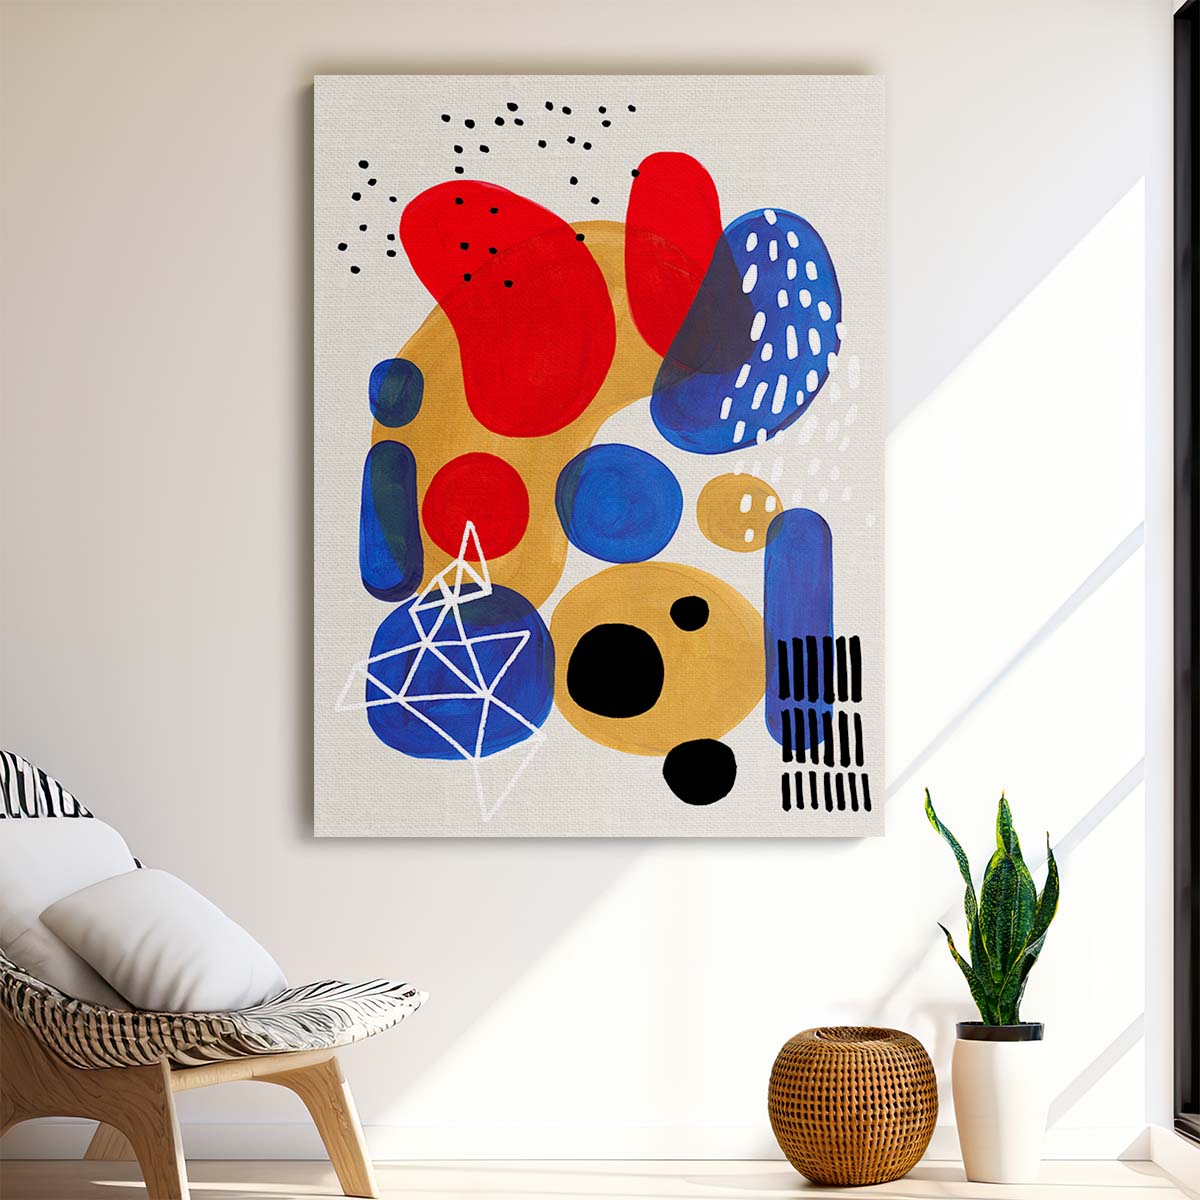 Ejaaz Haniff's Colorful Geometric Illustration Abstract Circles on White by Luxuriance Designs, made in USA